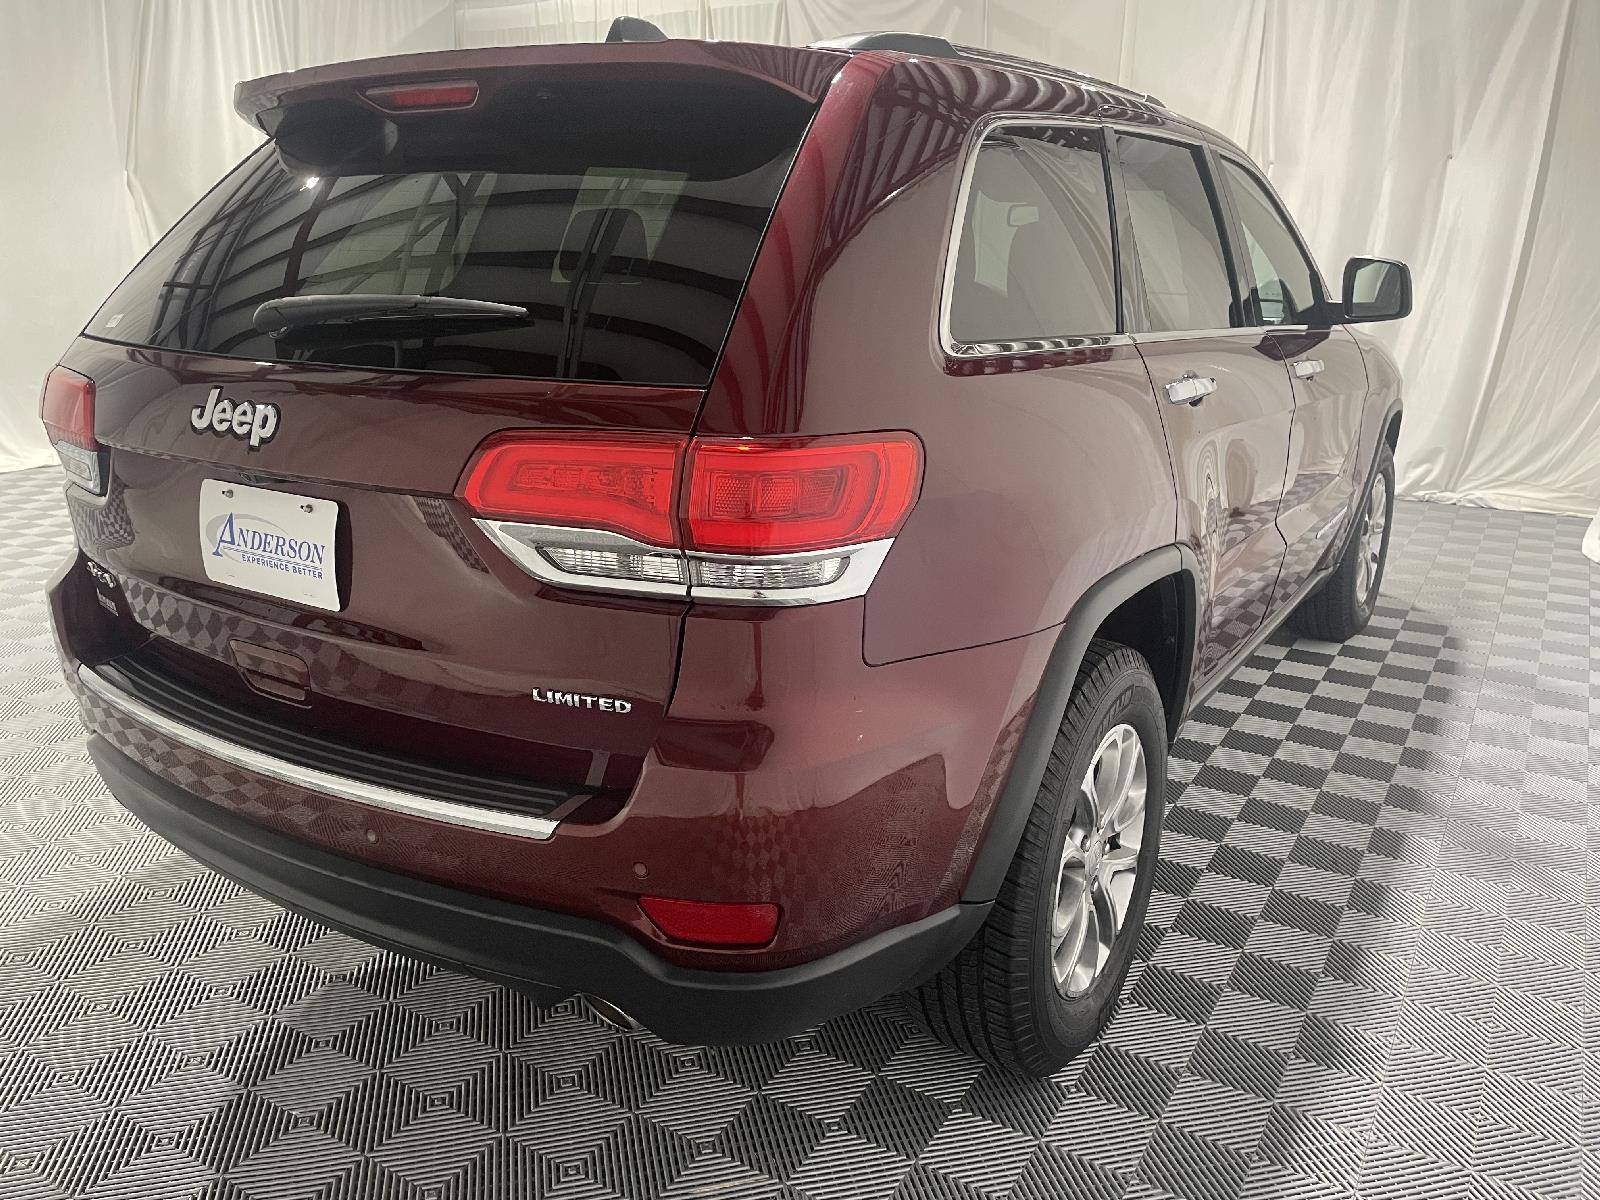 Used 2016 Jeep Grand Cherokee Limited SUV for sale in St Joseph MO